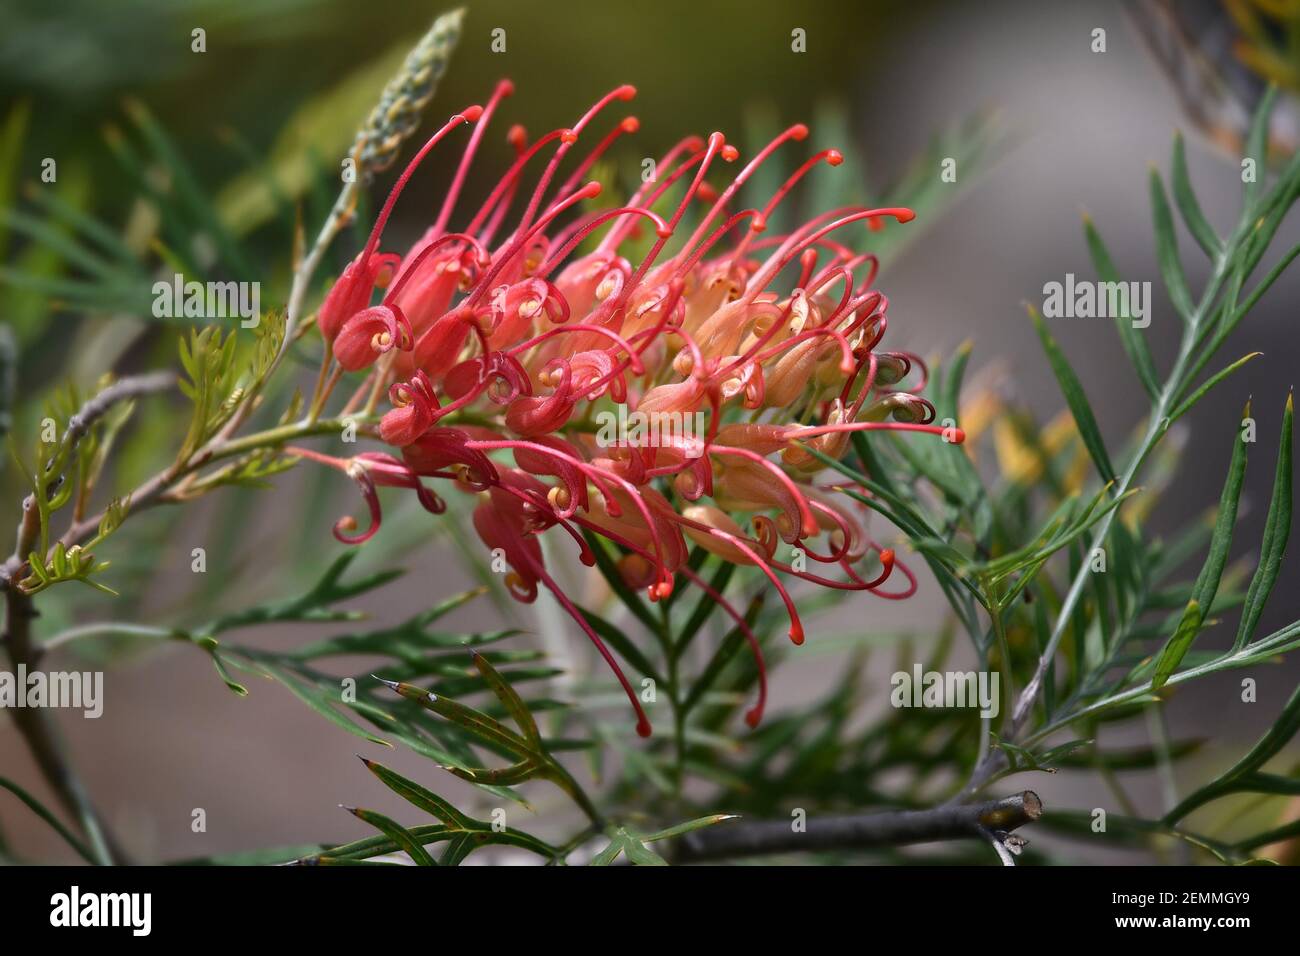 Grevillea rosmarinifolia a native evergreen flowering plant composition on a natural green background. Stock Photo